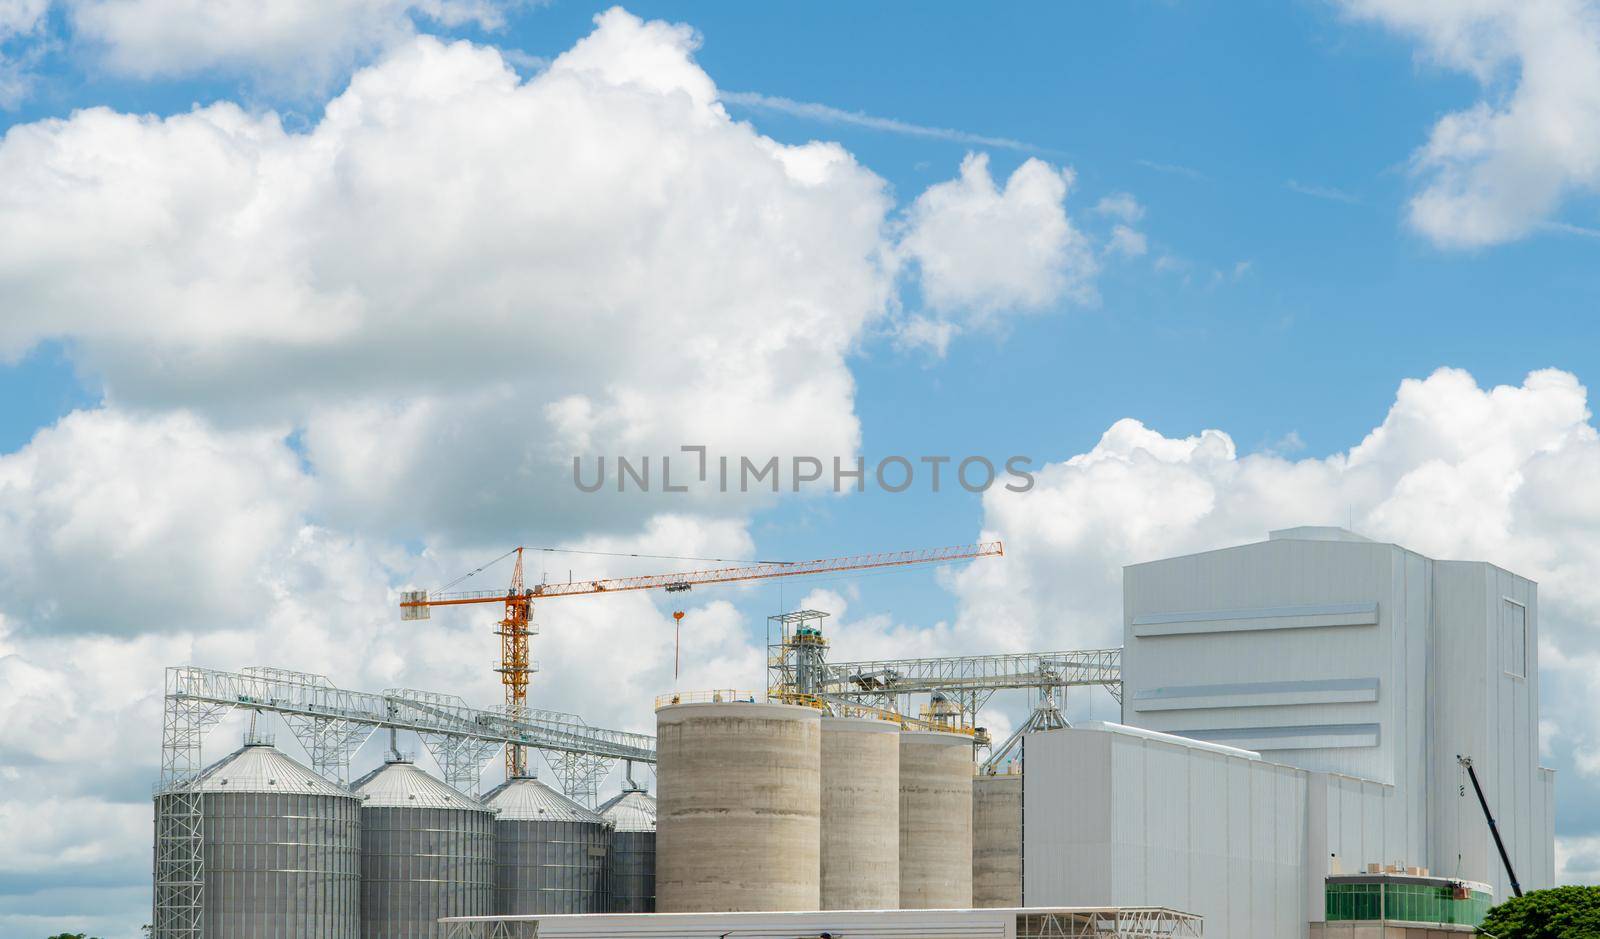 Animal feed factory construction site. Agricultural silo at feed mill factory. Tank for store grain in feed manufacturing. Seed stock tower for commercial animal feed production. Animal food industry.